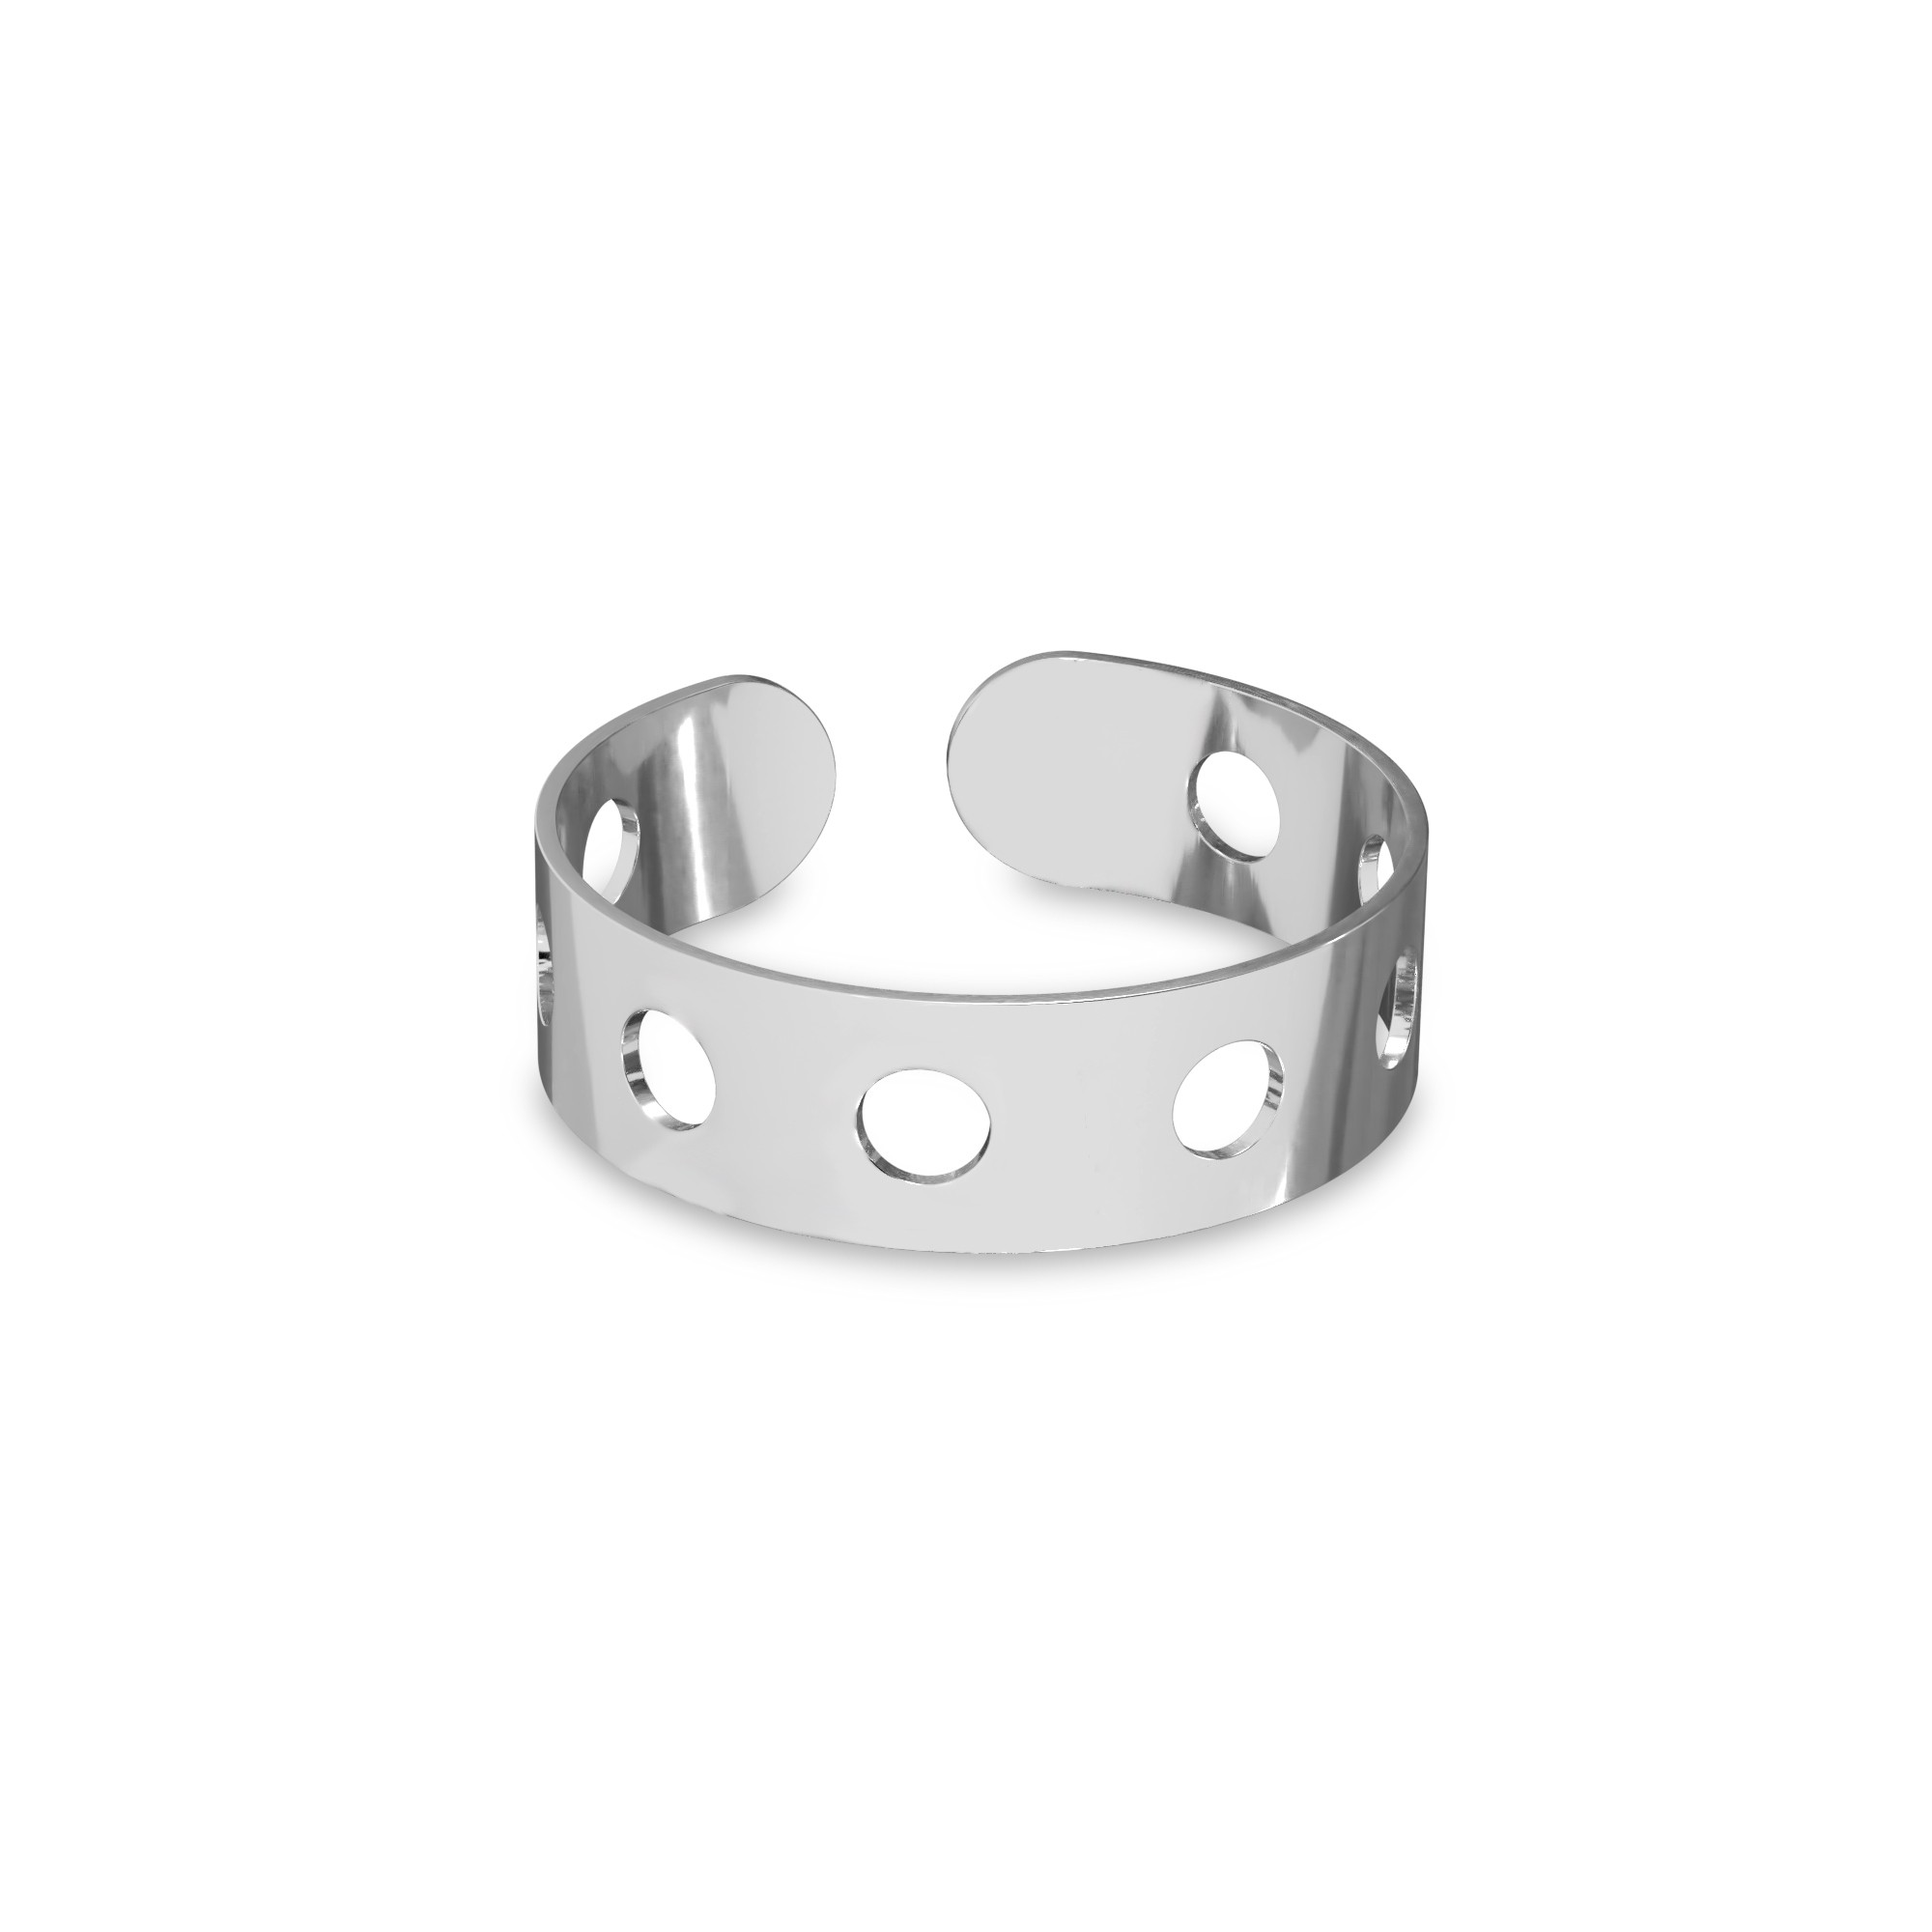 Knuckle ring with wheels, sterling silver 925